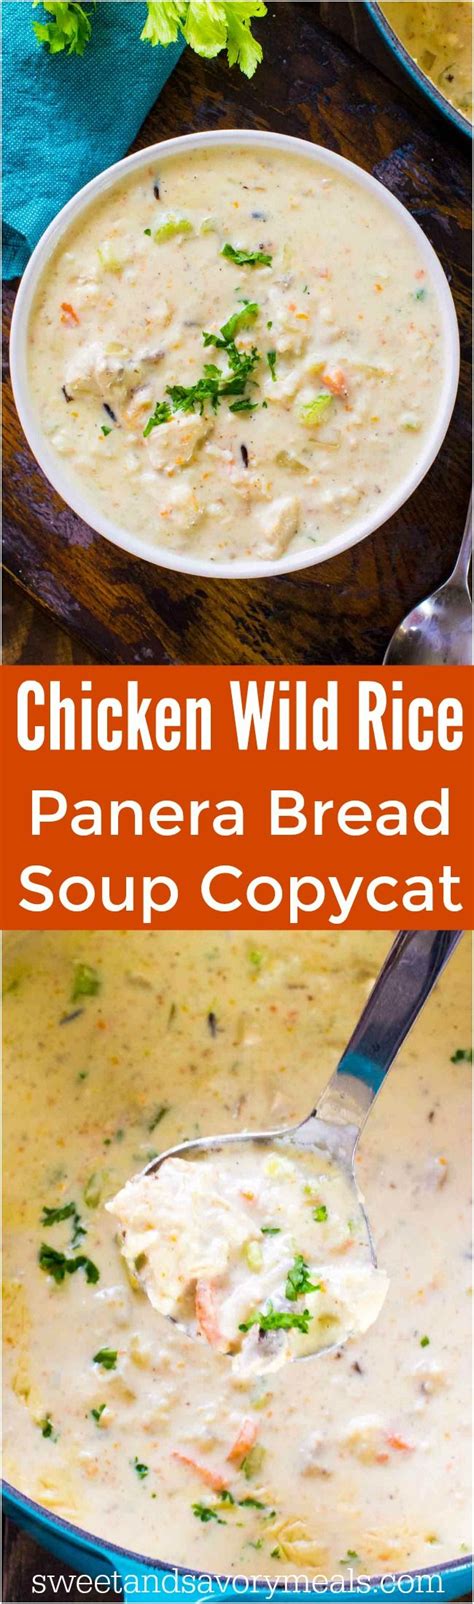 Not only does this soup taste just like panera's (maybe even a bit better, hehe), but all three of my kids gave this two thumbs up. Panera Bread Chicken Wild Rice Soup Copycat [VIDEO ...